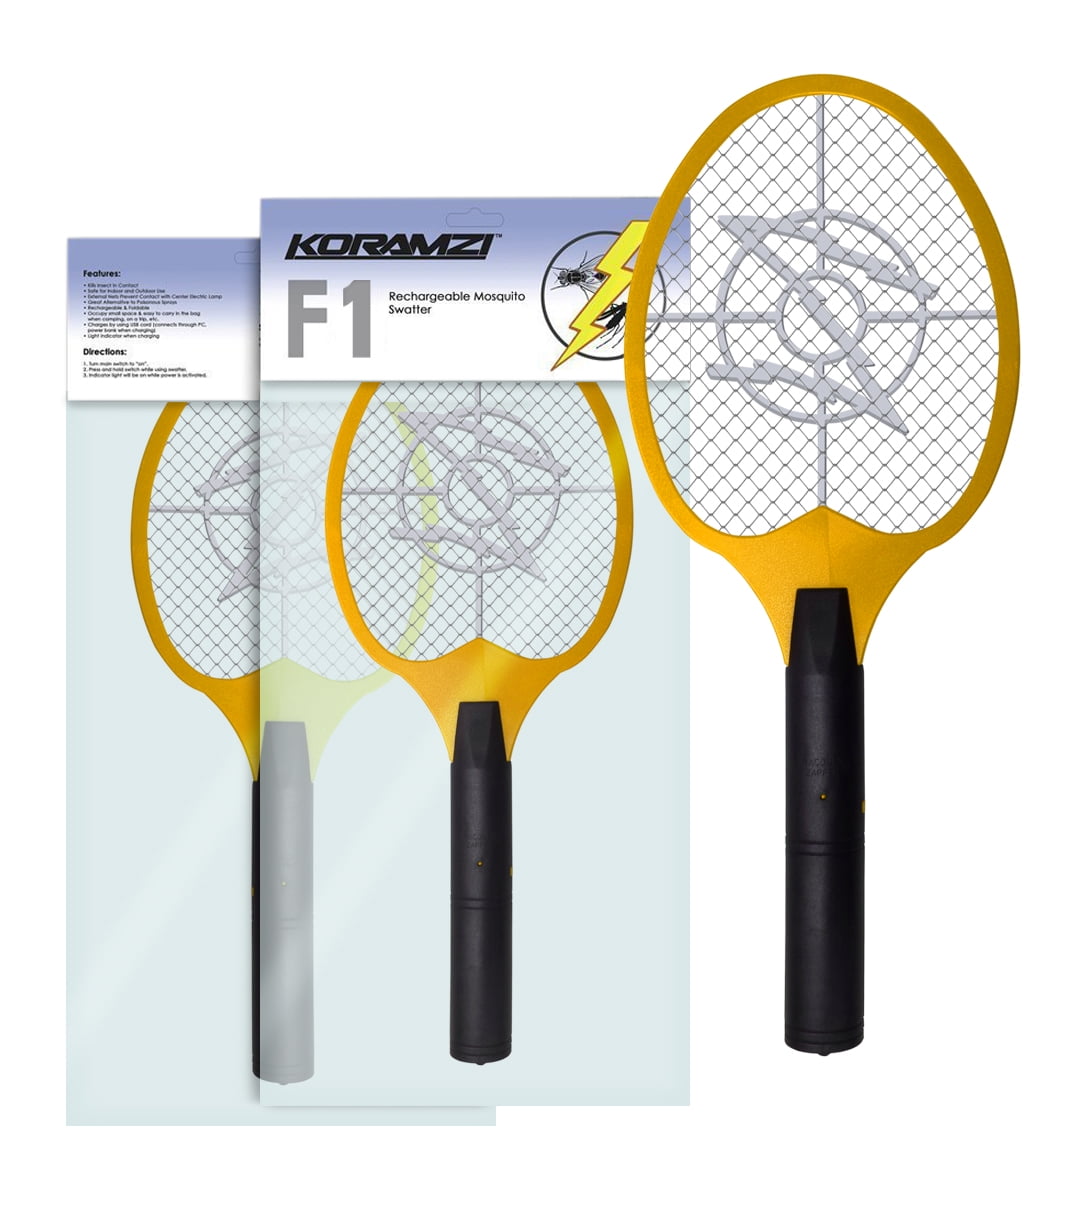 2X Electronic Bug Zapper Mosquito Insect Electric Fly Swatter Racket Bat Yellow